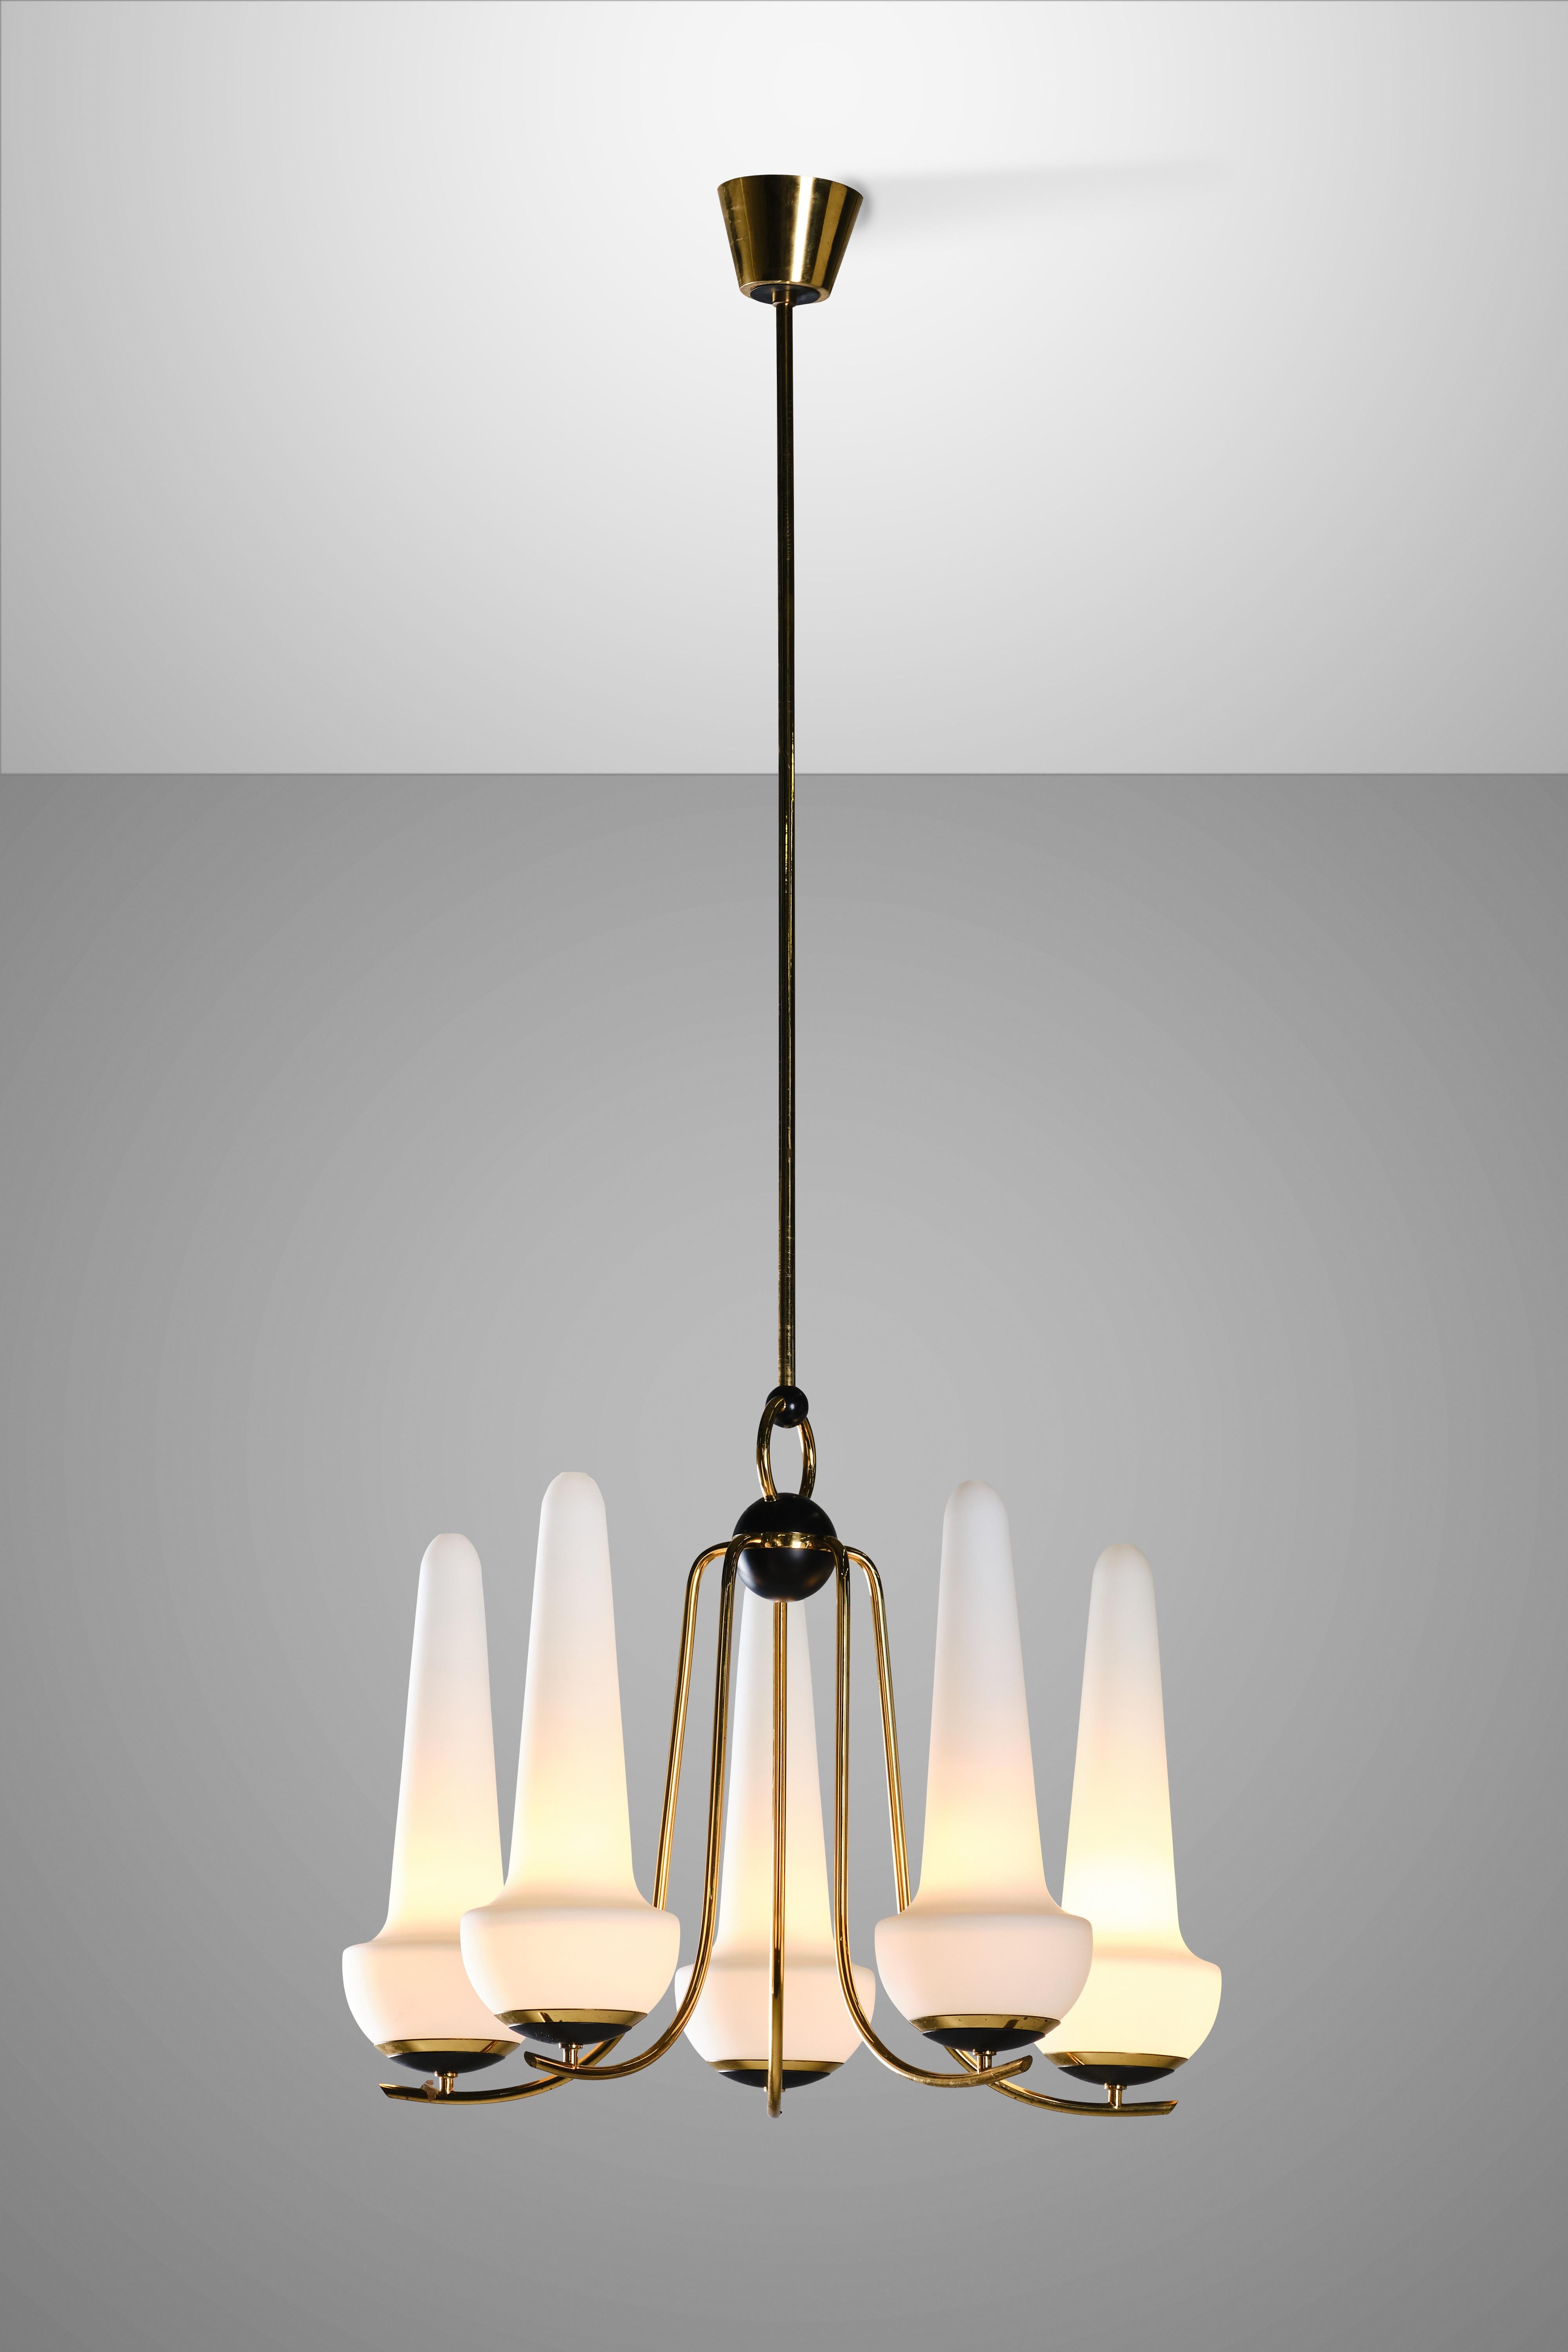 Wondeful 1950's Stilnovo ceiling lamp in metal, brass and opaline glass. A true piece of art featuring five brass arms, holding upturned opaline glass shades perfectly contrasting and balancing the black and gold parts. The lights provide a warm and